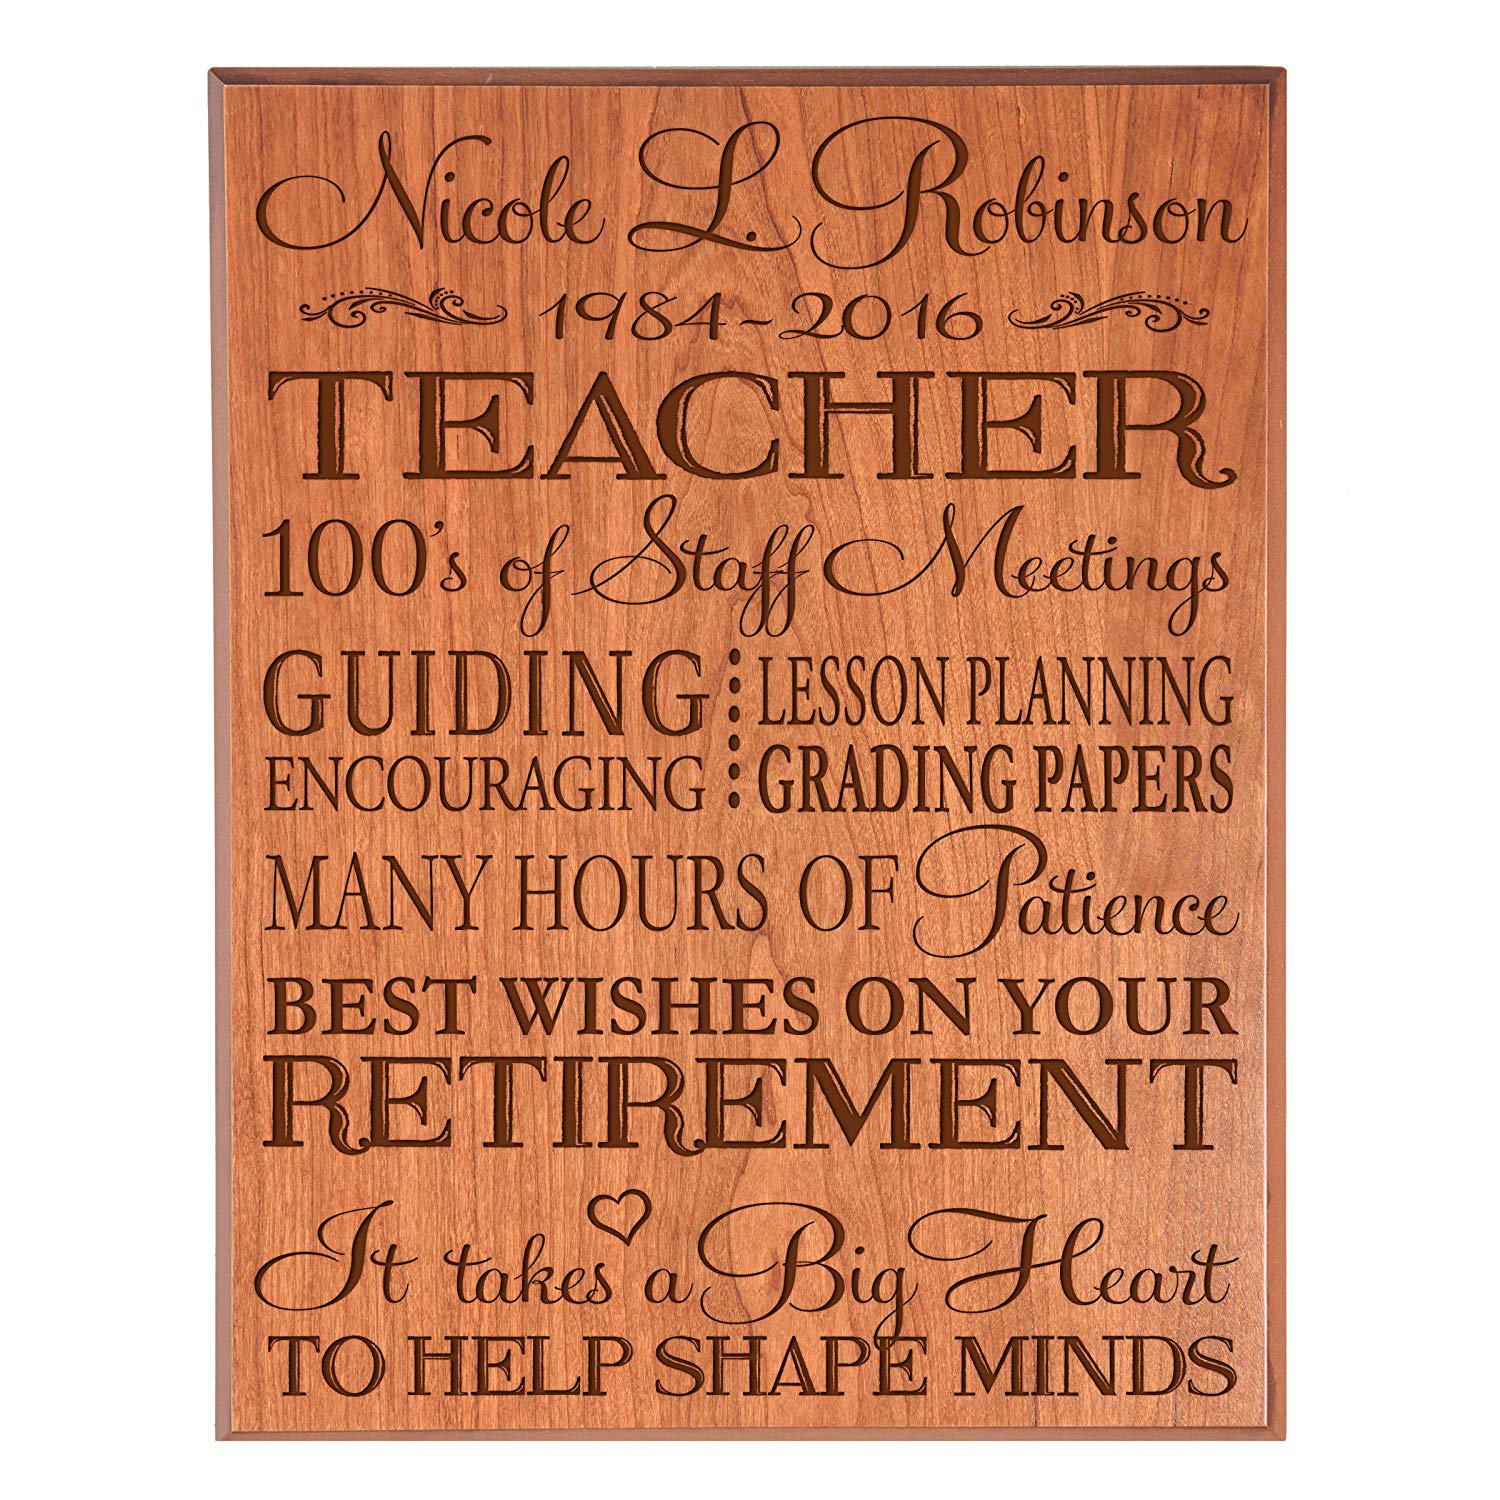 Personalized Retirement Gift Plaque For Men And Women - Teacher - LifeSong Milestones